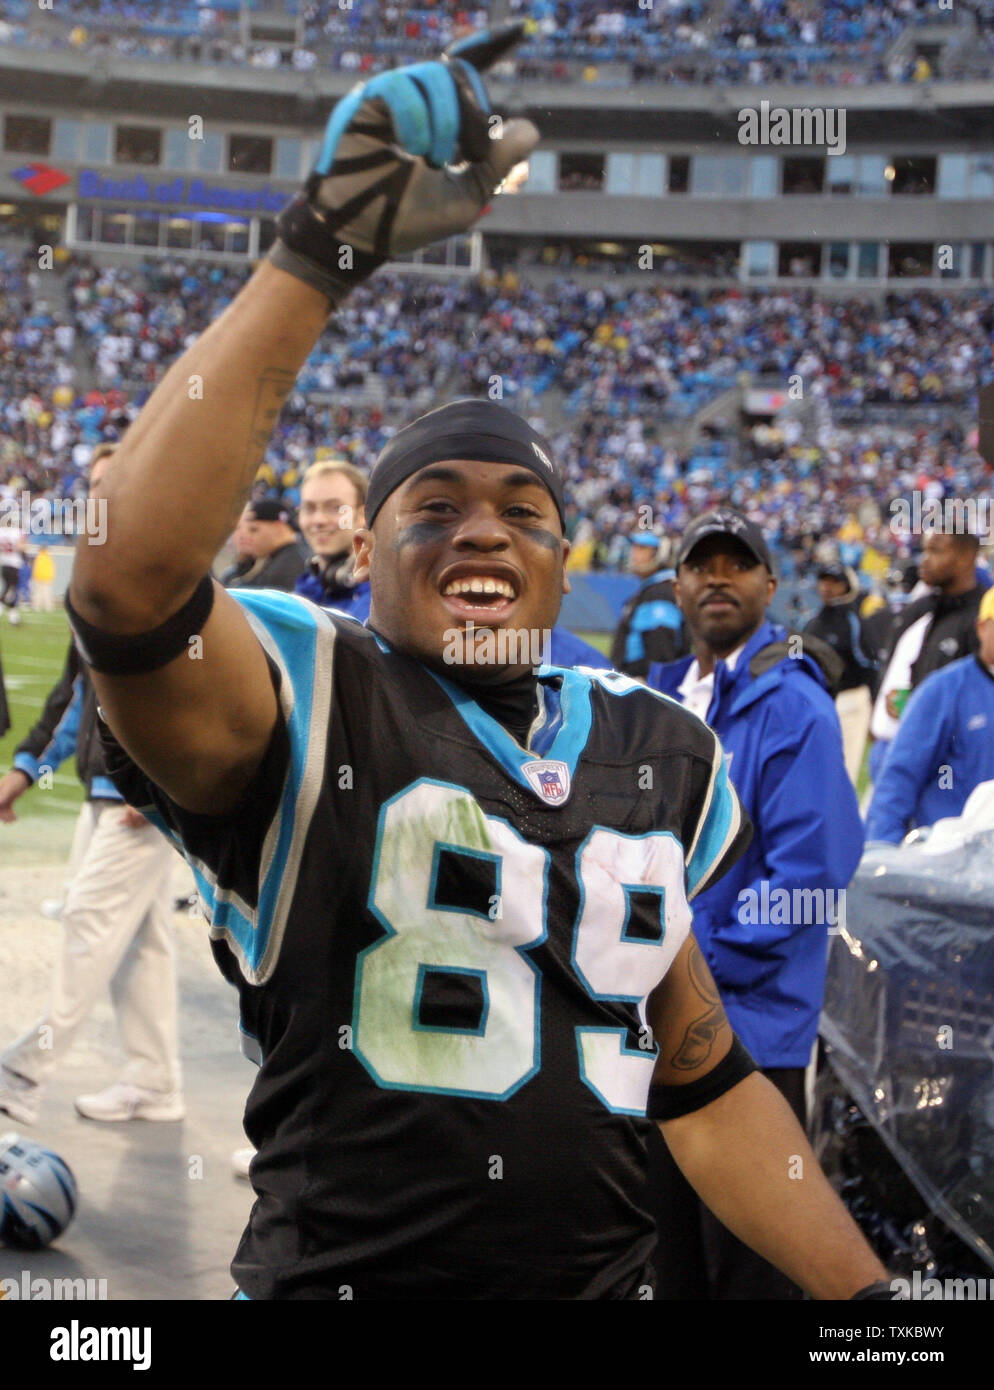 Carolina Panthers wide receiver Steve Smith (89) celebrates with fans in the closing seconds of their 24-6 win over NFC South Division foe Atlanta Falcons at Bank of America Stadium December 4, 2005 in Charlotte, NC.   (UPI Photo/Bob Carey) Stock Photo